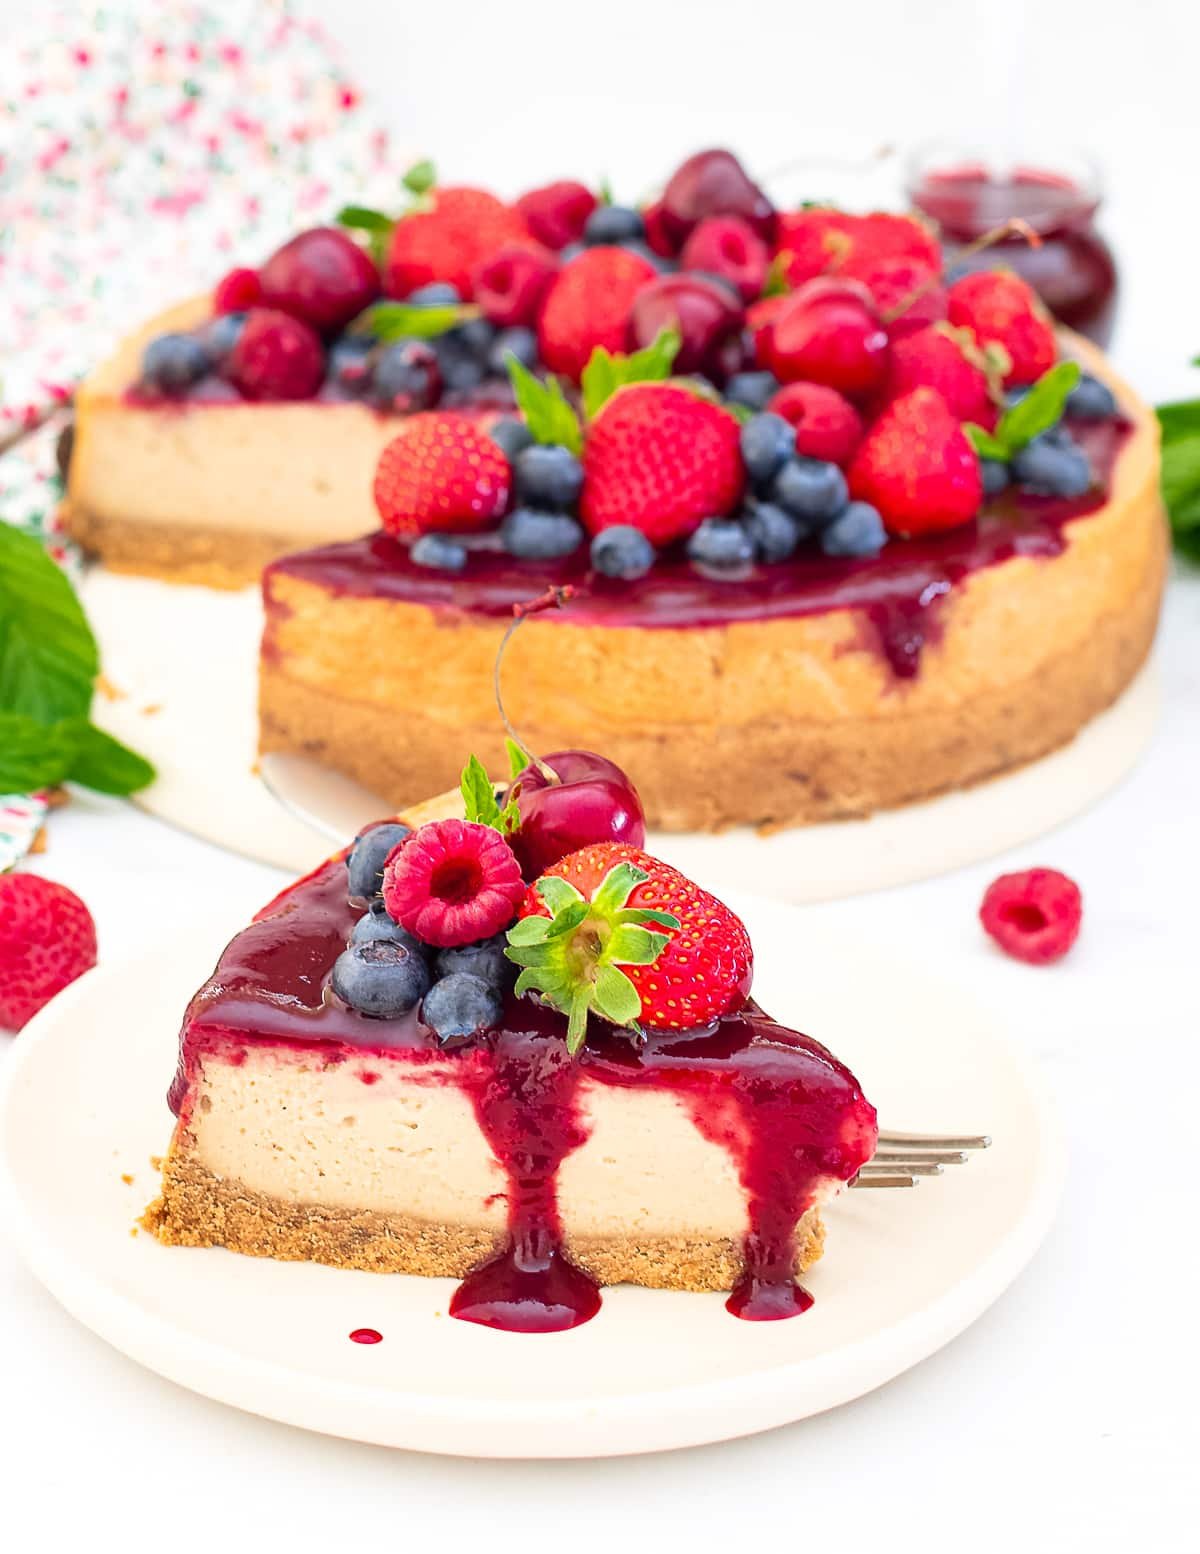 a slice of cheesecake with berry compote and fresh berries on a plate and the remaining large cheesecake tin the background.